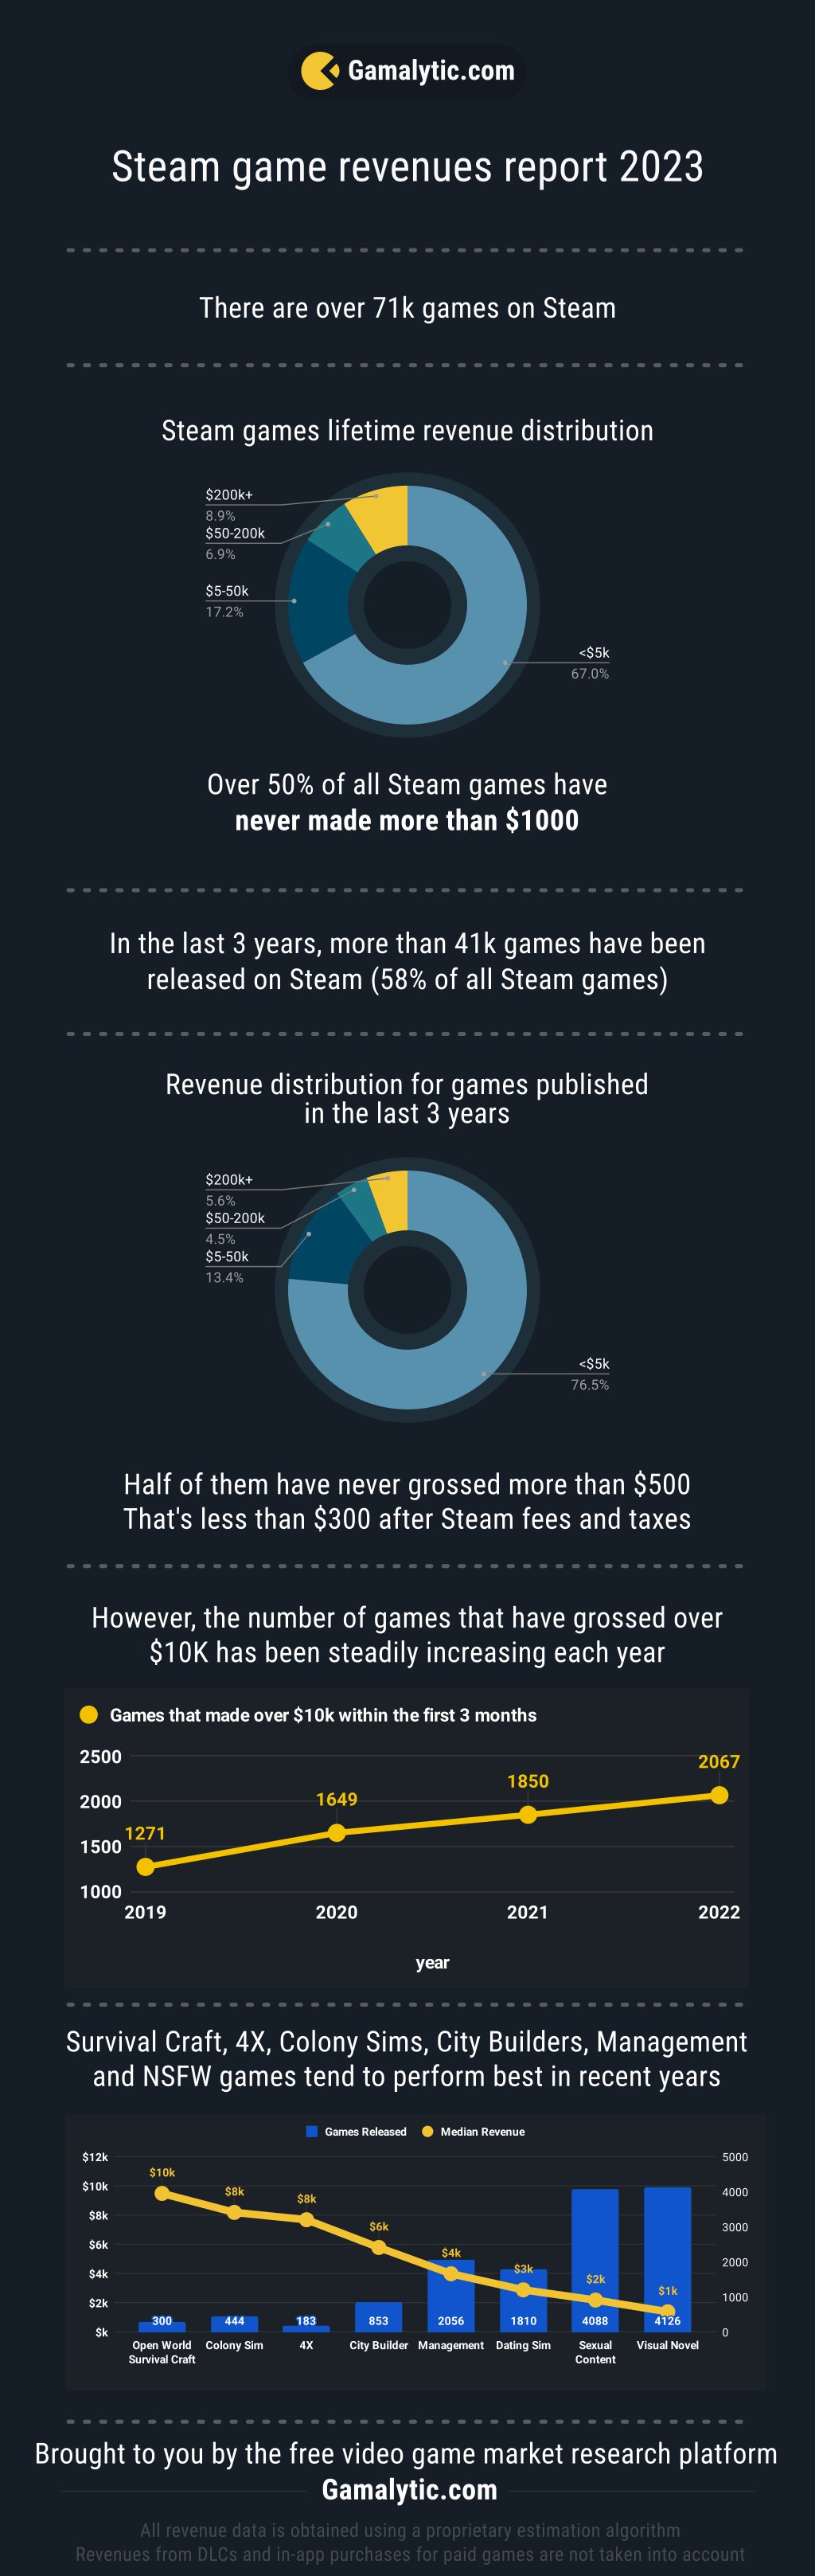 Mining Odyssey - SteamSpy - All the data and stats about Steam games